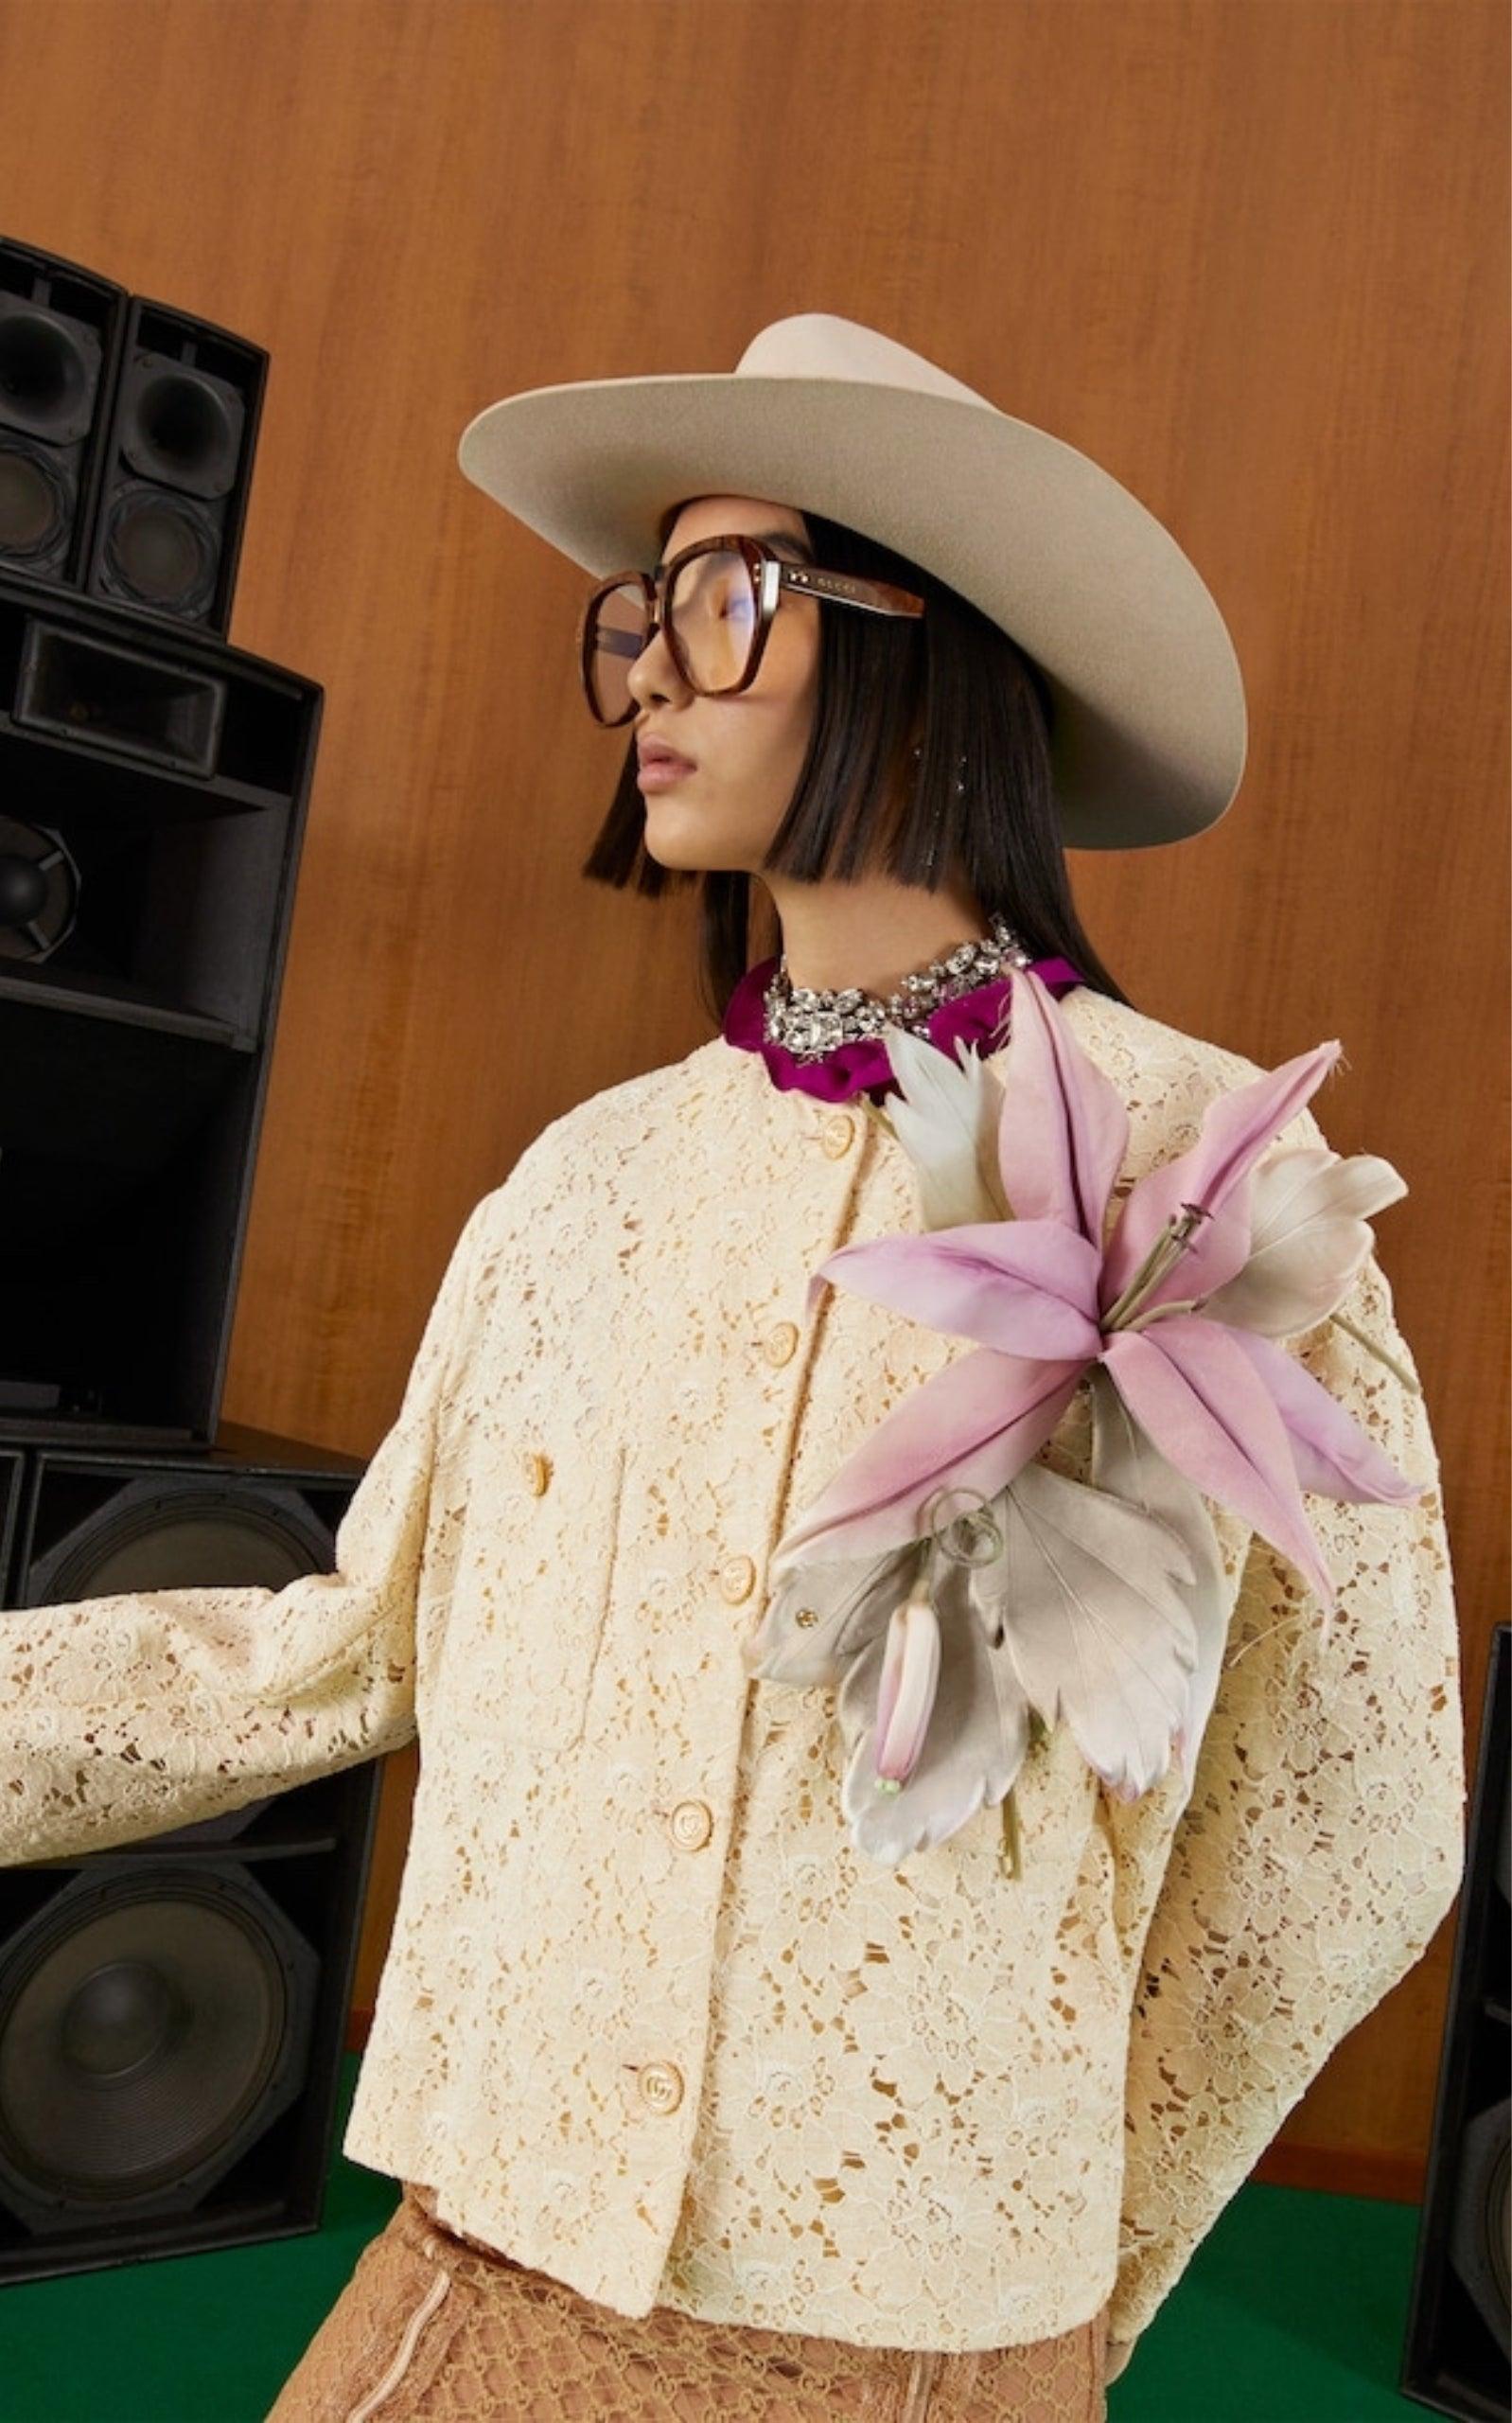  GucciCotton and Silk Flower White Brooch - Runway Catalog